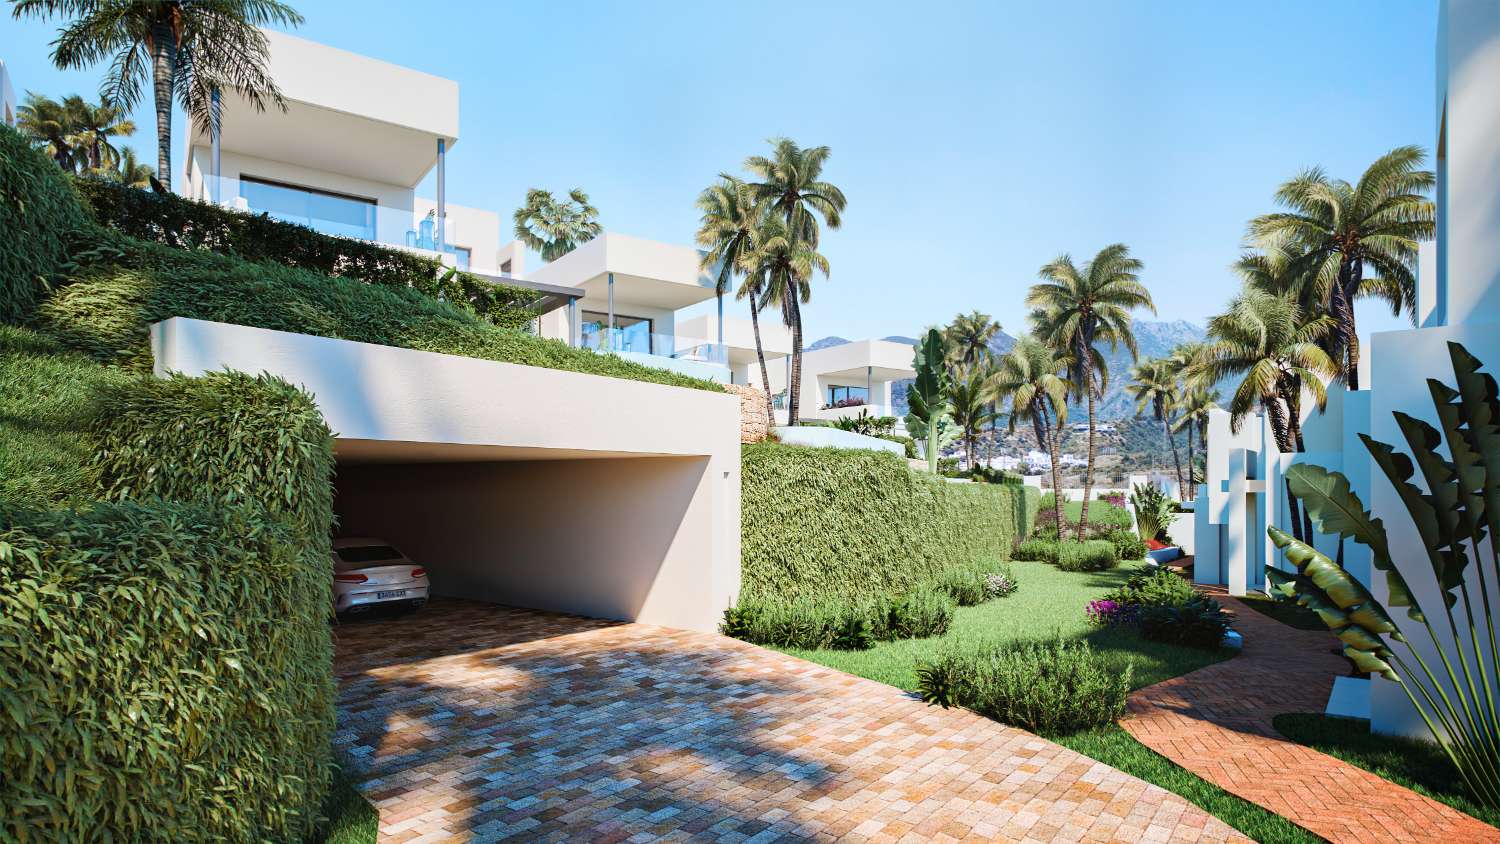 Exclusive semi-detached villa located in one of the best areas of Marbella, with views of the sea and the golf course.